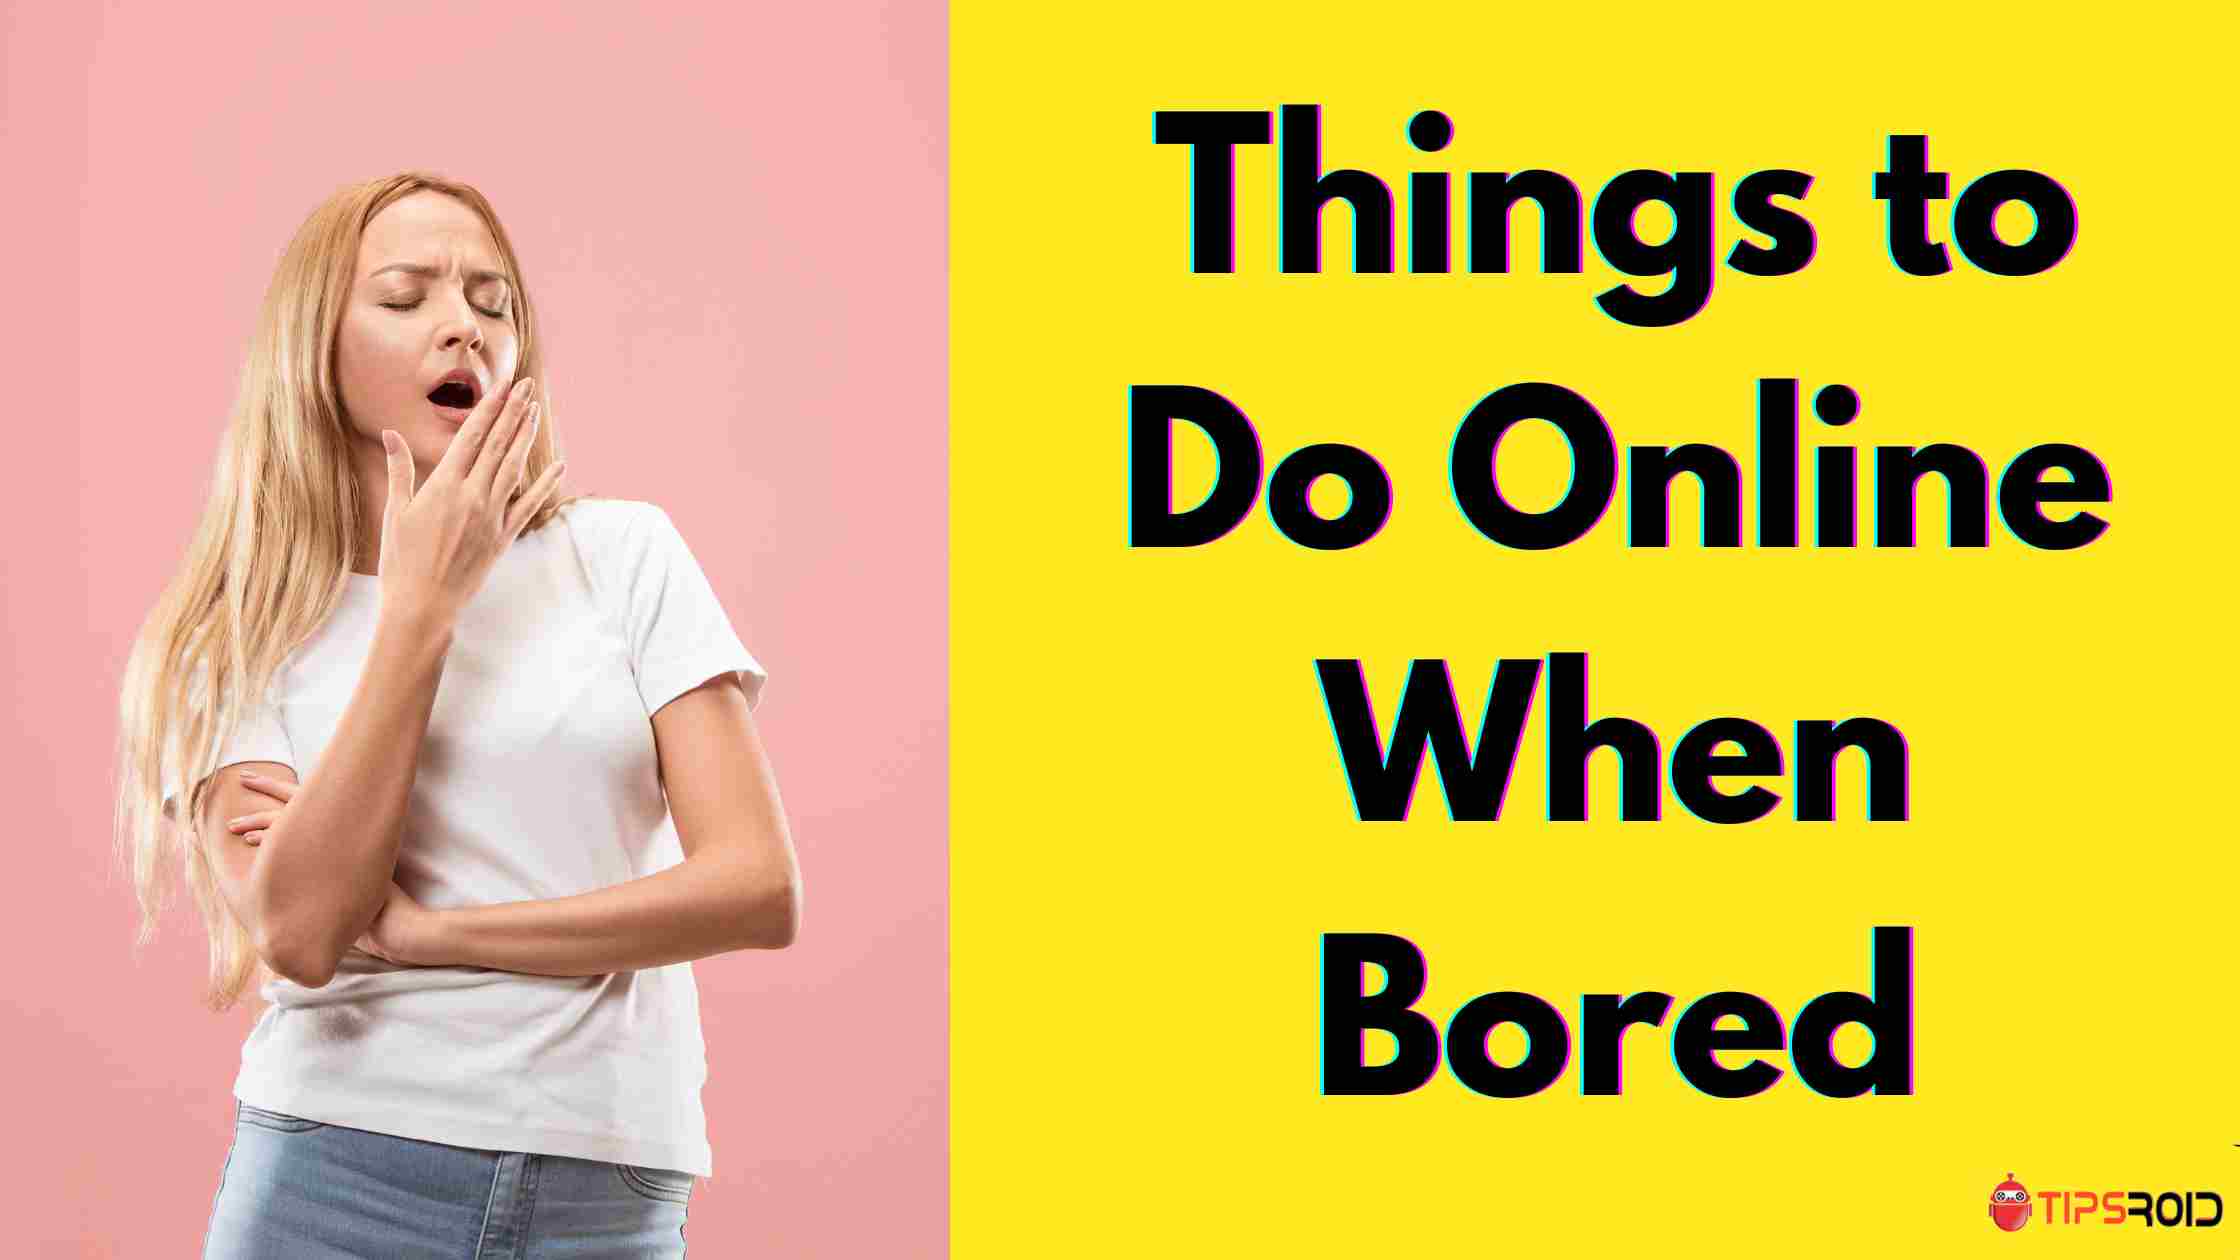 Things to Do Online When Bored